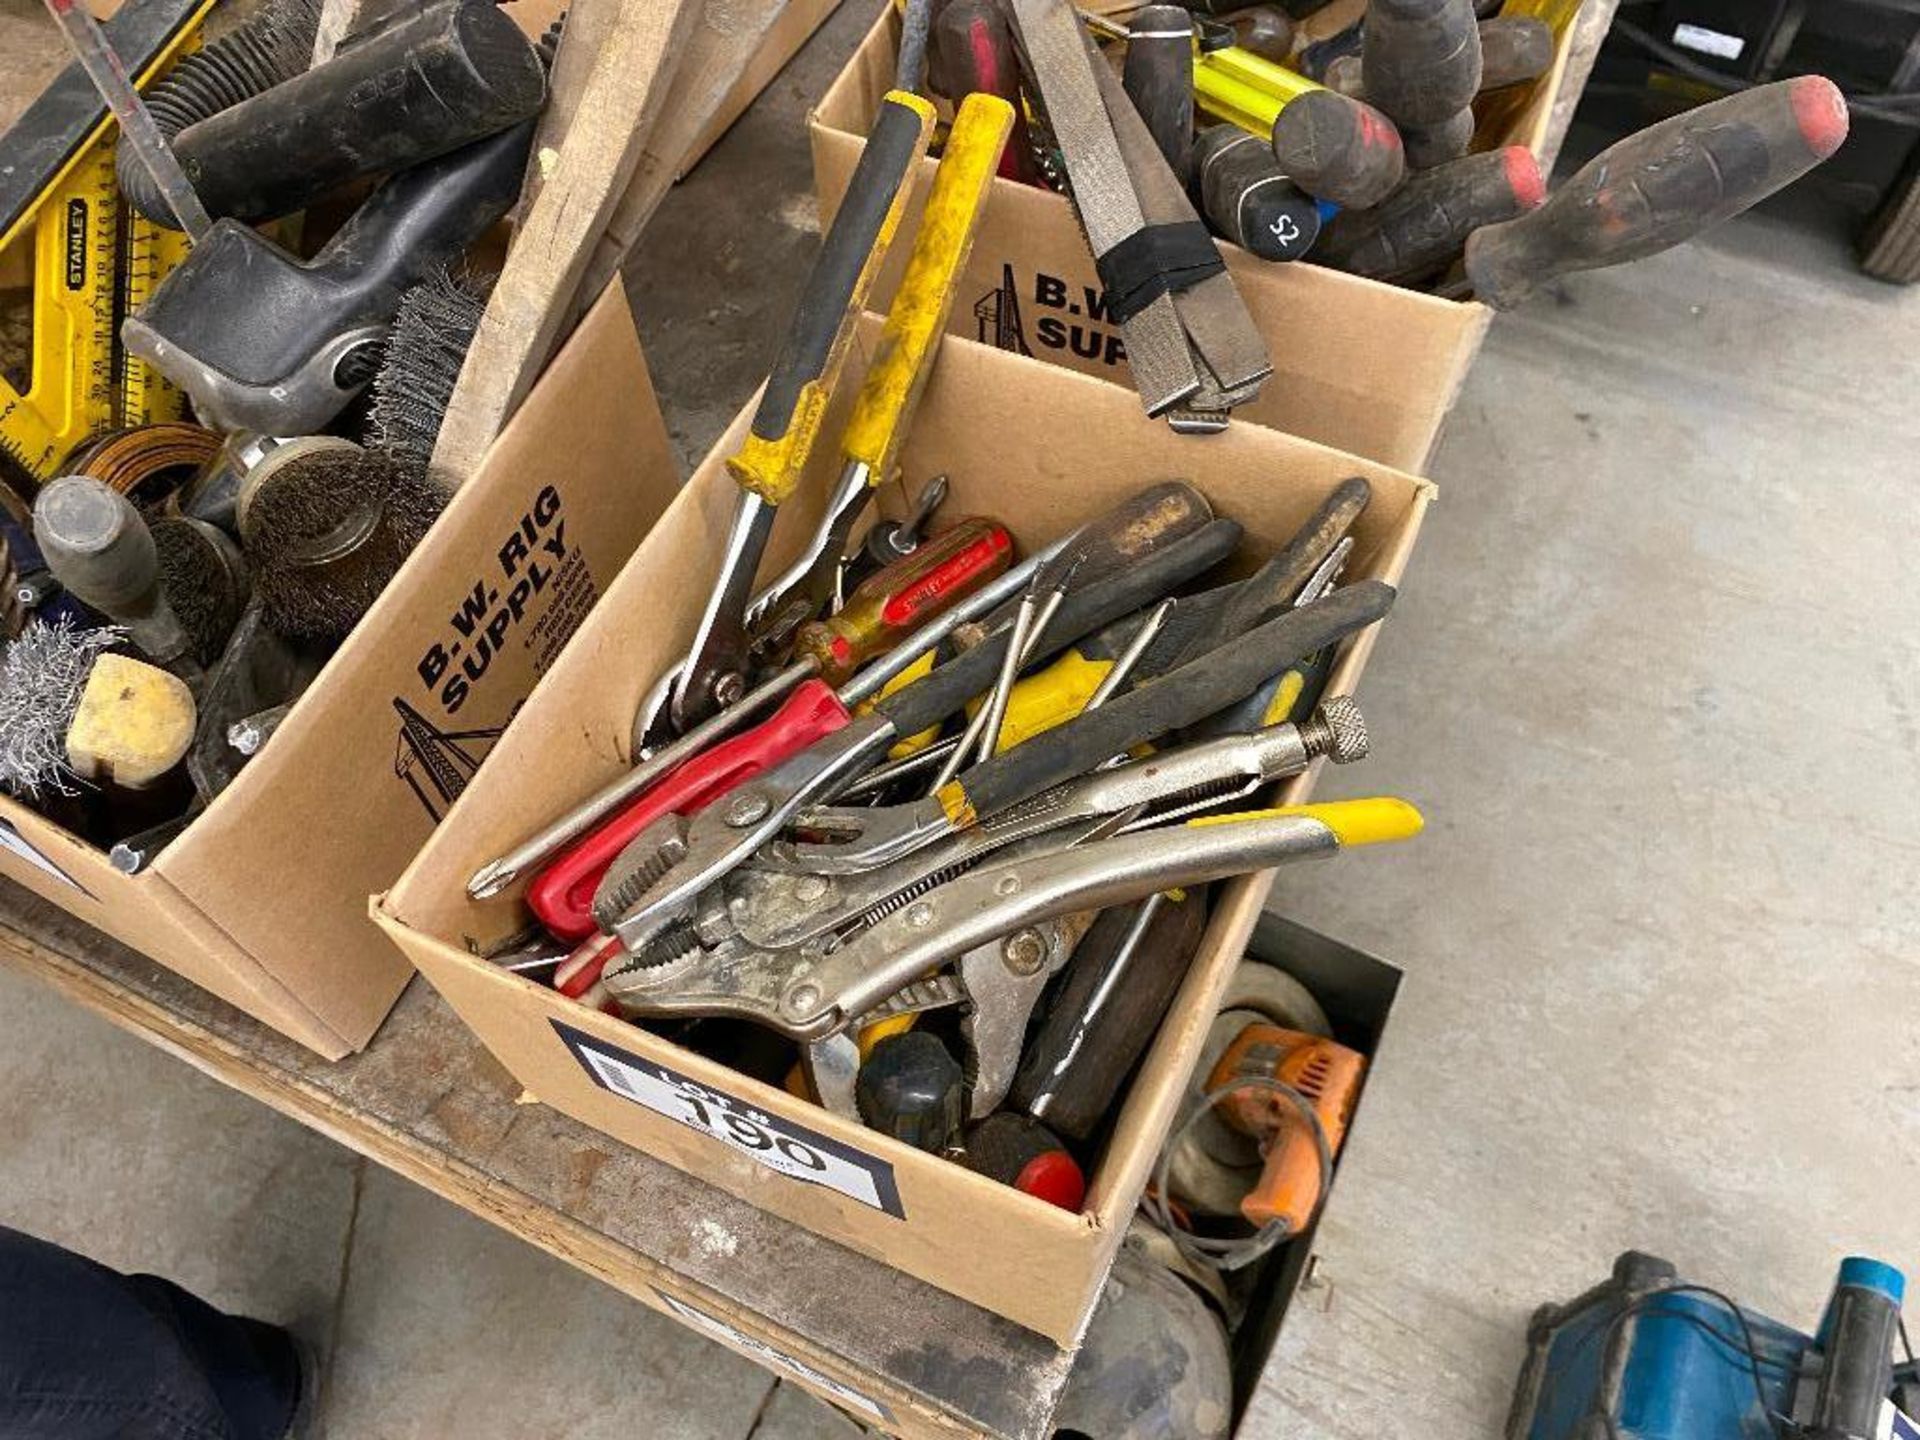 Lot of Asst. Hand Tools including Vice Grips, Screwdrivers, etc. - Image 2 of 4